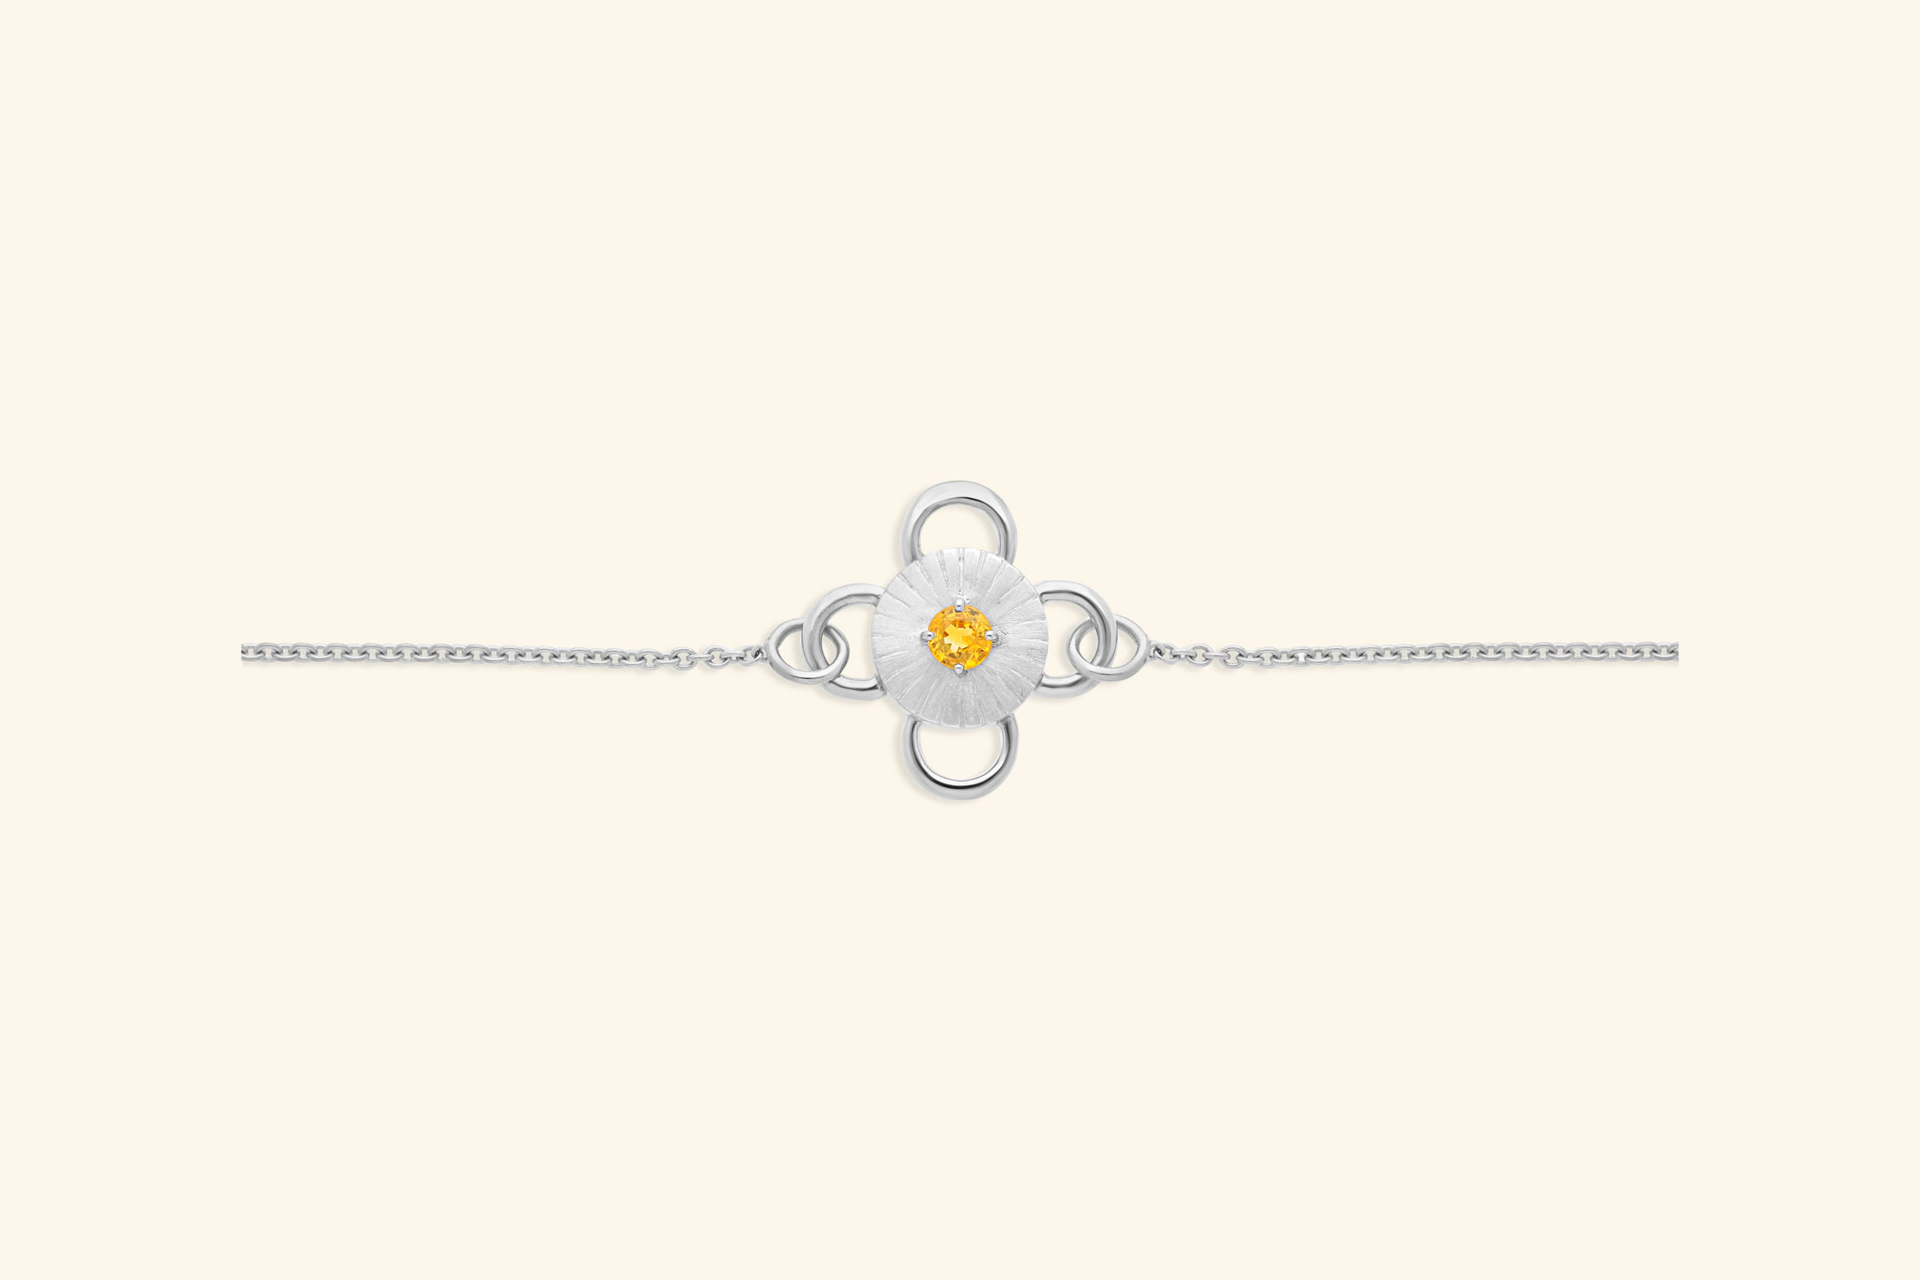 Baby Bolt bracelet jewelry in silver, set with a round yellow sapphire